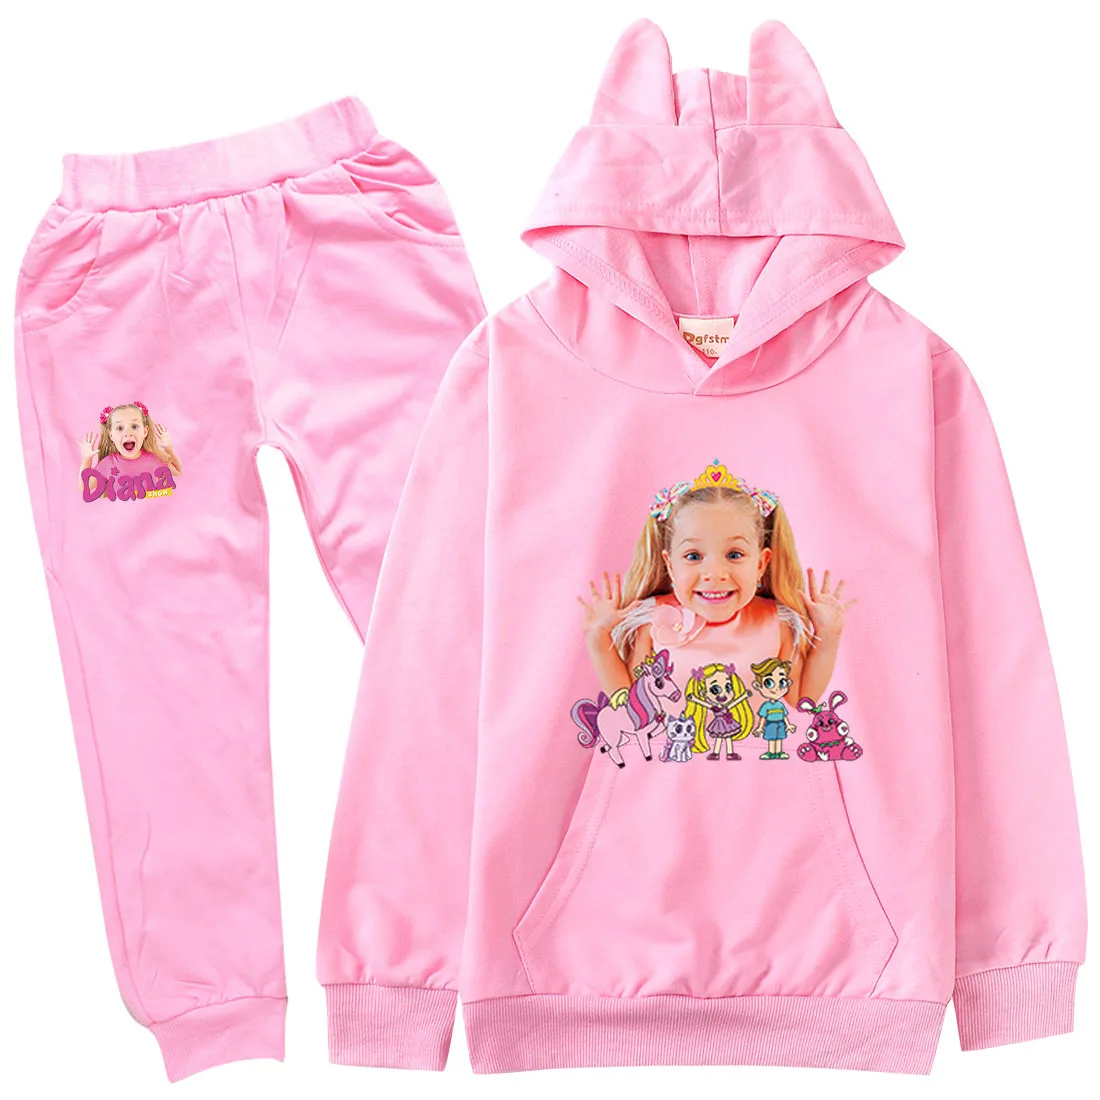 

Lovely Diana Y Roma Show Clothes Kids Cartoon Cute Hoodie+Jogging Pants 2pcs Set Toddler Girls Outfits Teenager Boys Tracksuits